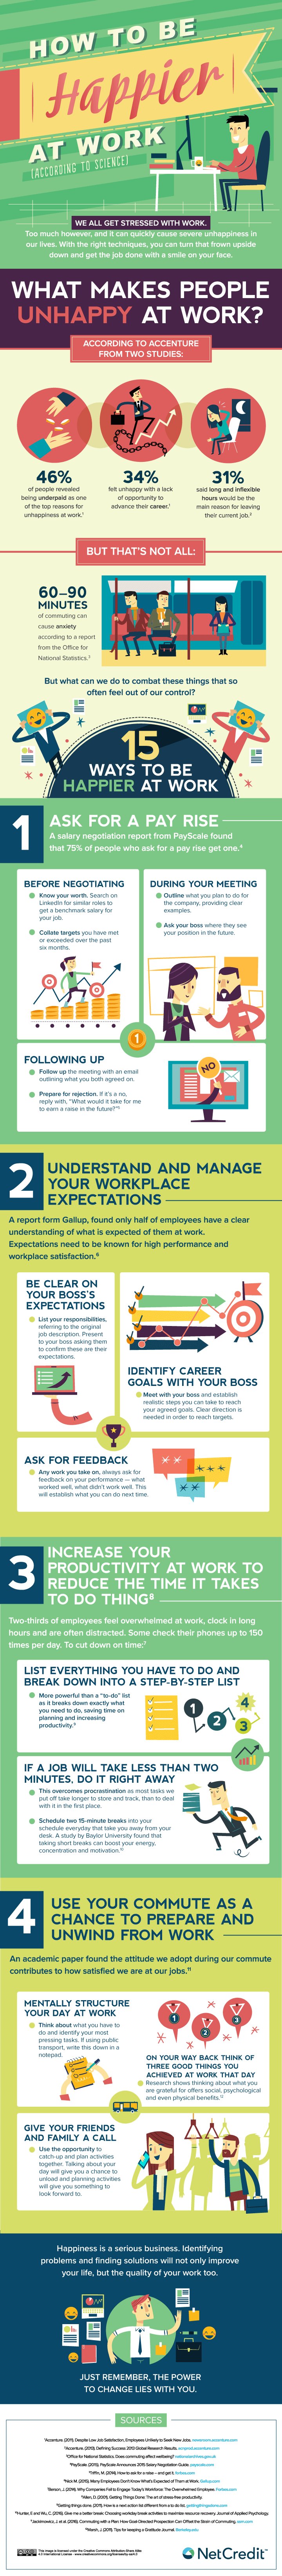 How To Be Happier At Work #Infographic